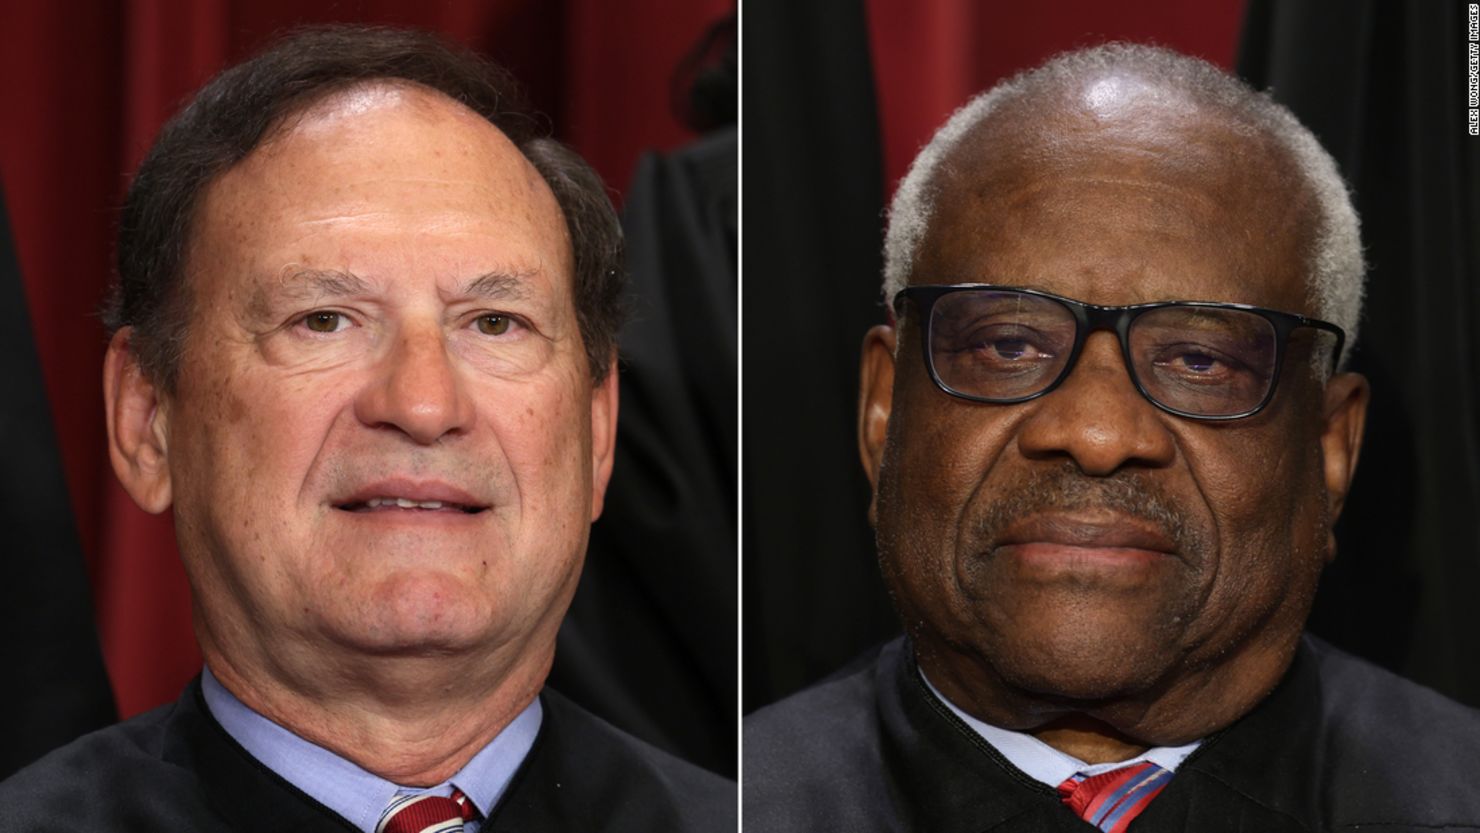 Justices Samuel Alito and Clarence Thomas.